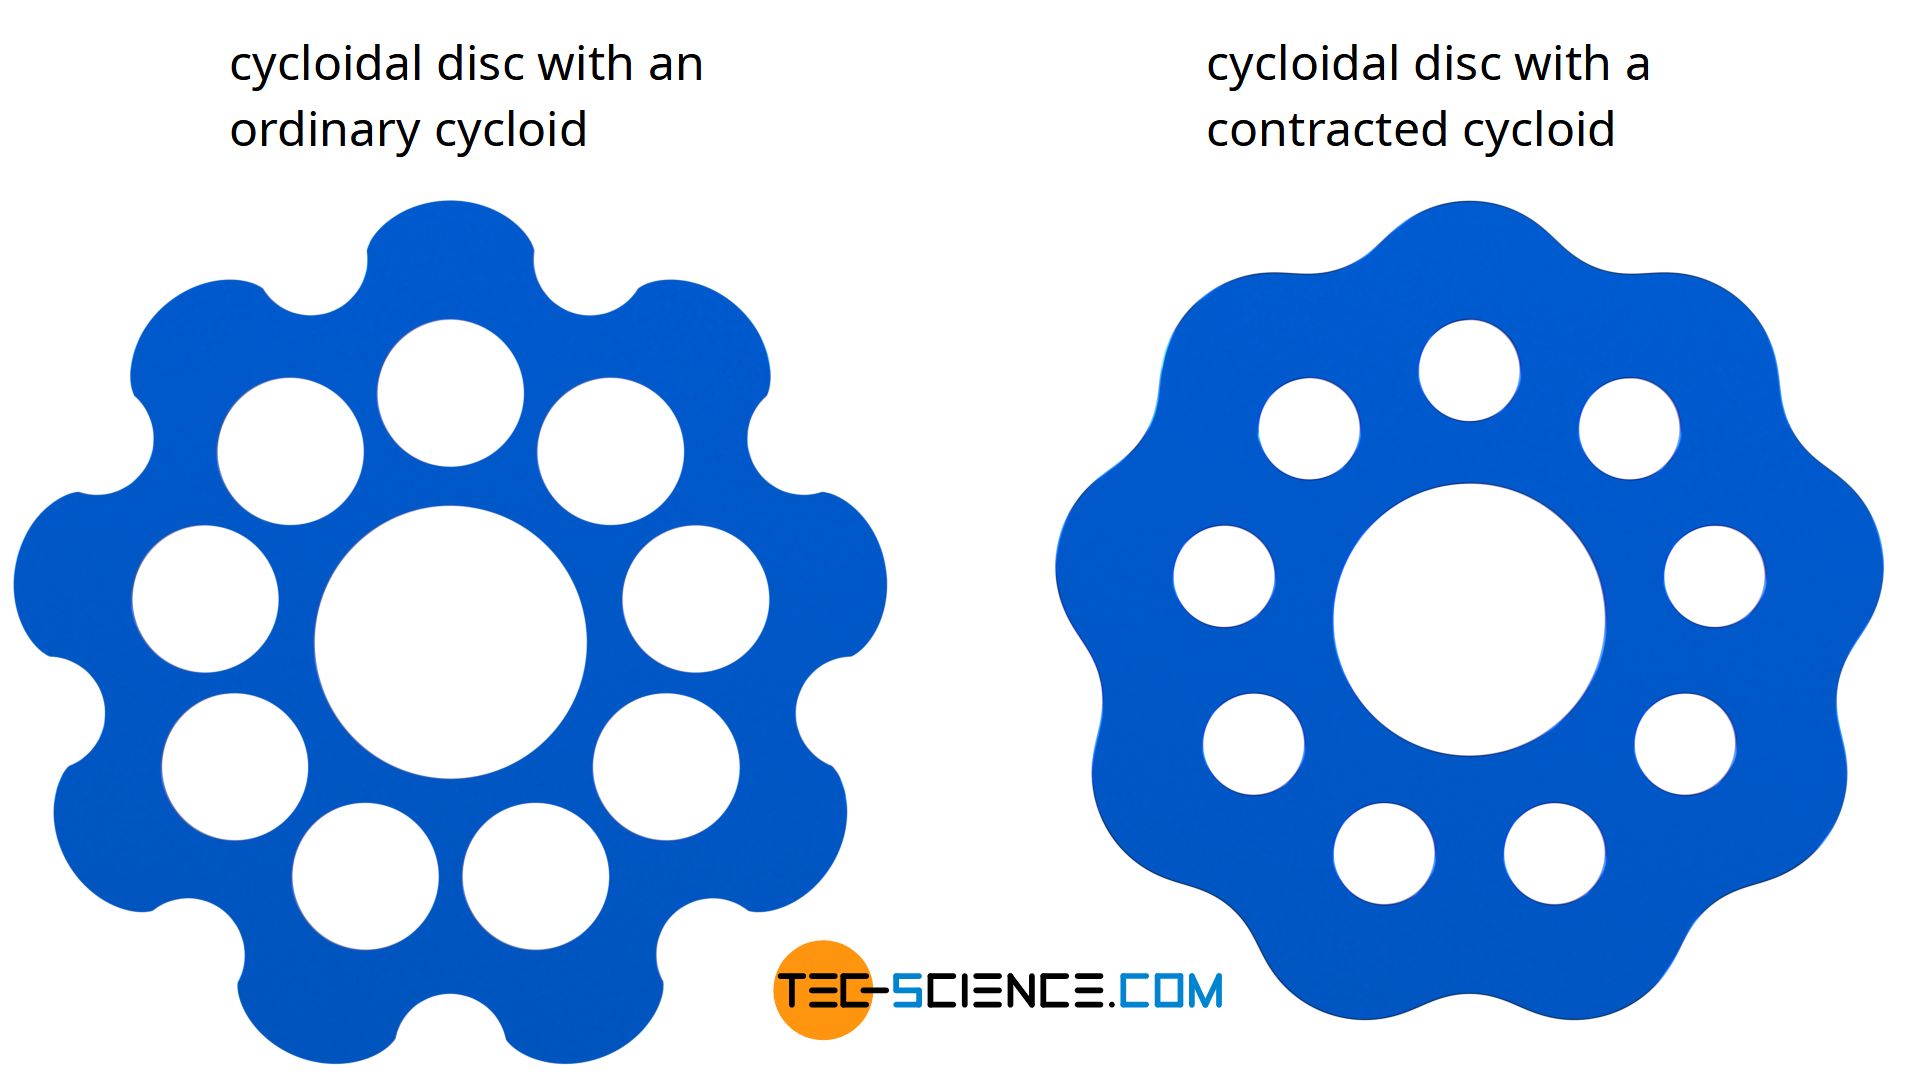 Cycloidal disc of an ordinary cycloid and a contracted cycloid